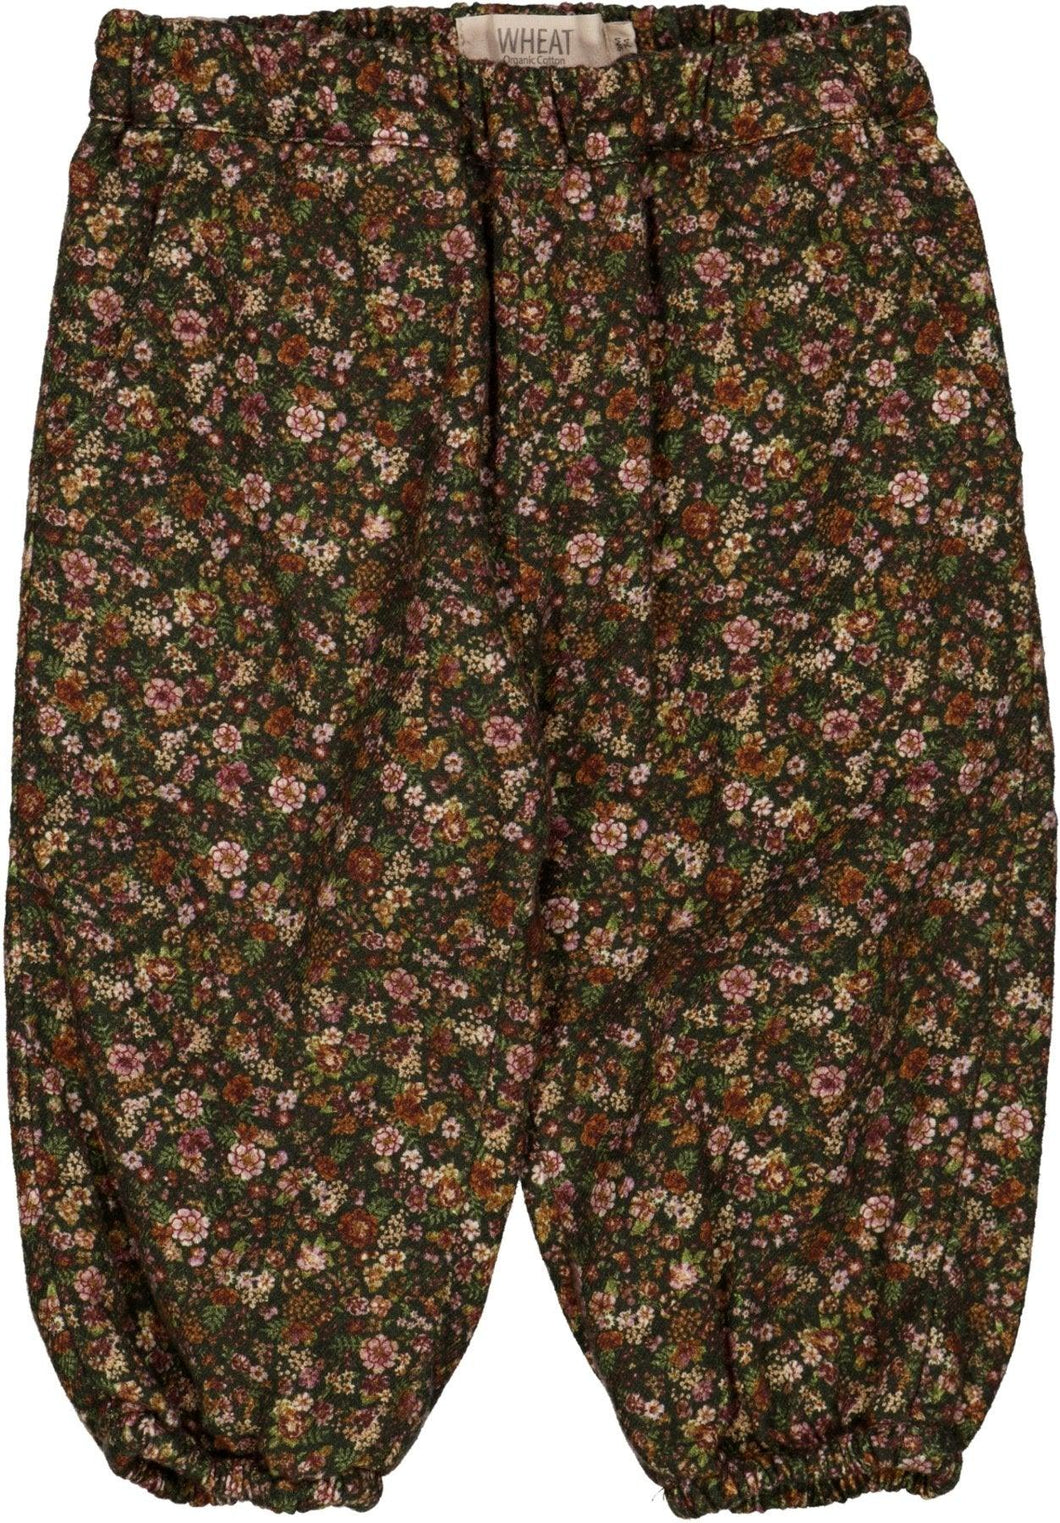 Trousers Malou Lined - Little moon